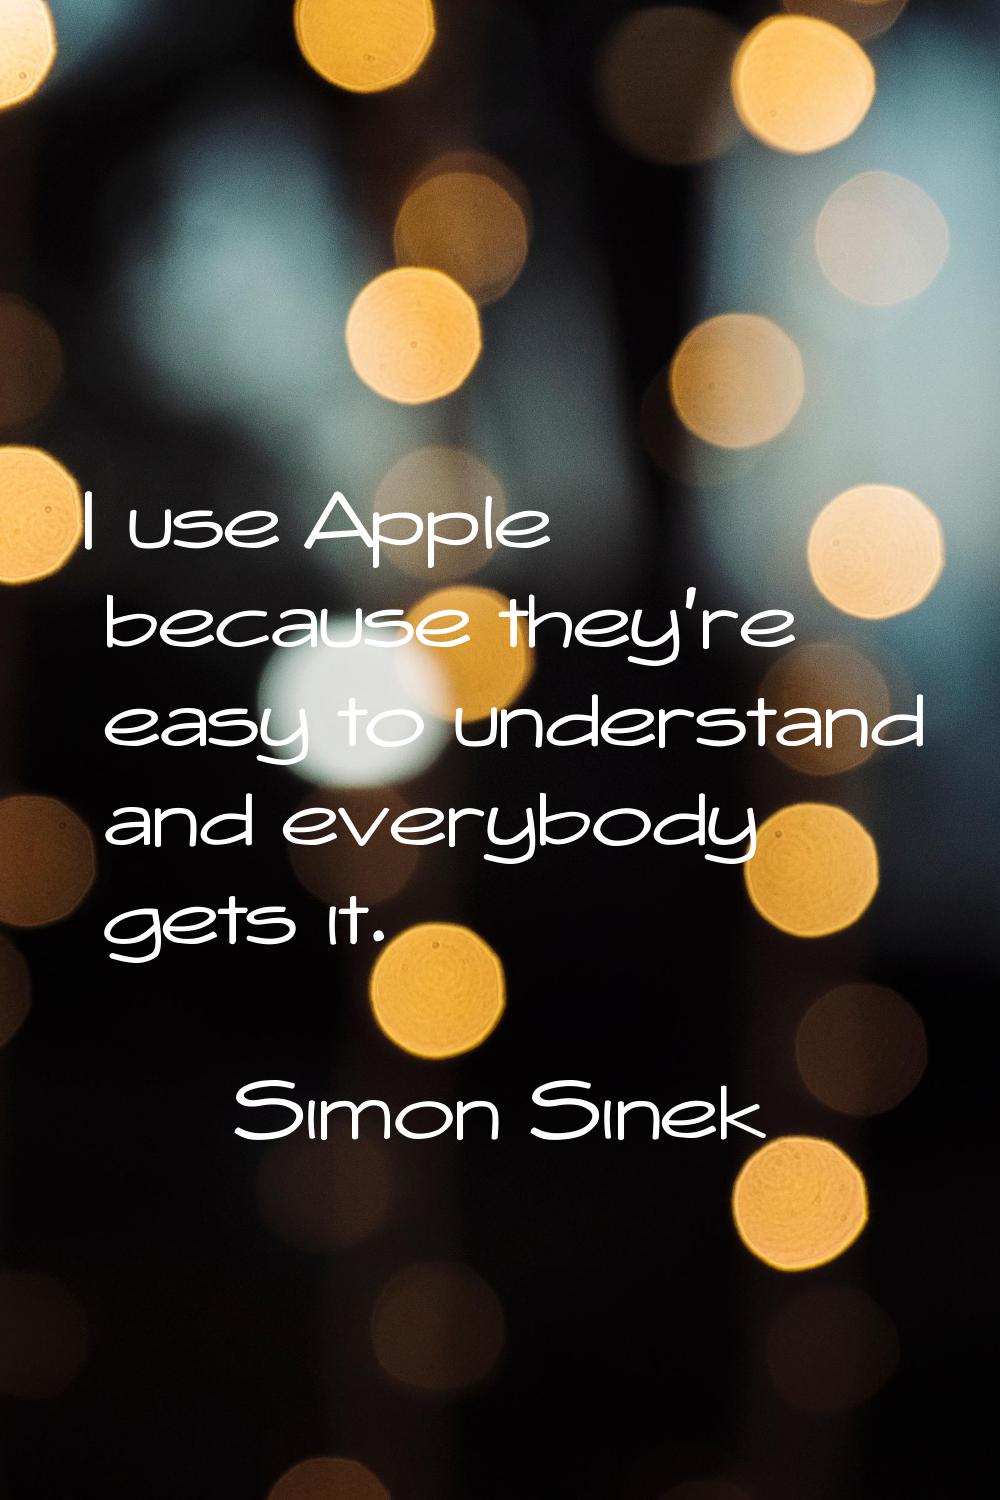 I use Apple because they're easy to understand and everybody gets it.